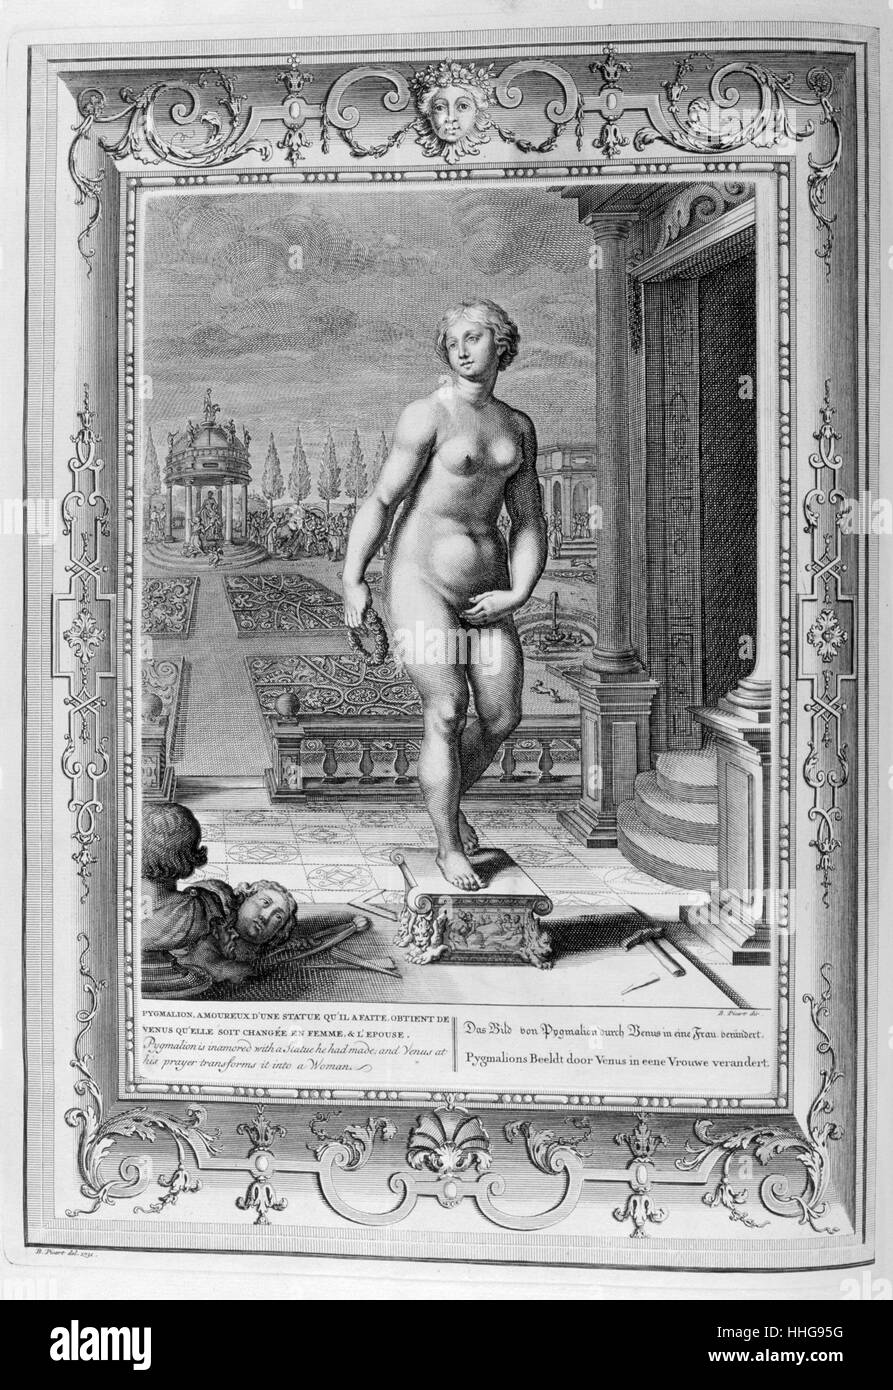 The sculpture of Pygmalion. Engraved illustration from 'The Temple of the Muses', 1733. This book represented remarkable events of antiquity drawn and engraved by Bernard Picart (1673-1733). Pygmalion is a legendary figure of Cyprus. In Ovid's narrative poem Metamorphoses, Pygmalion was a sculptor who fell in love with a statue he had carved. Stock Photo